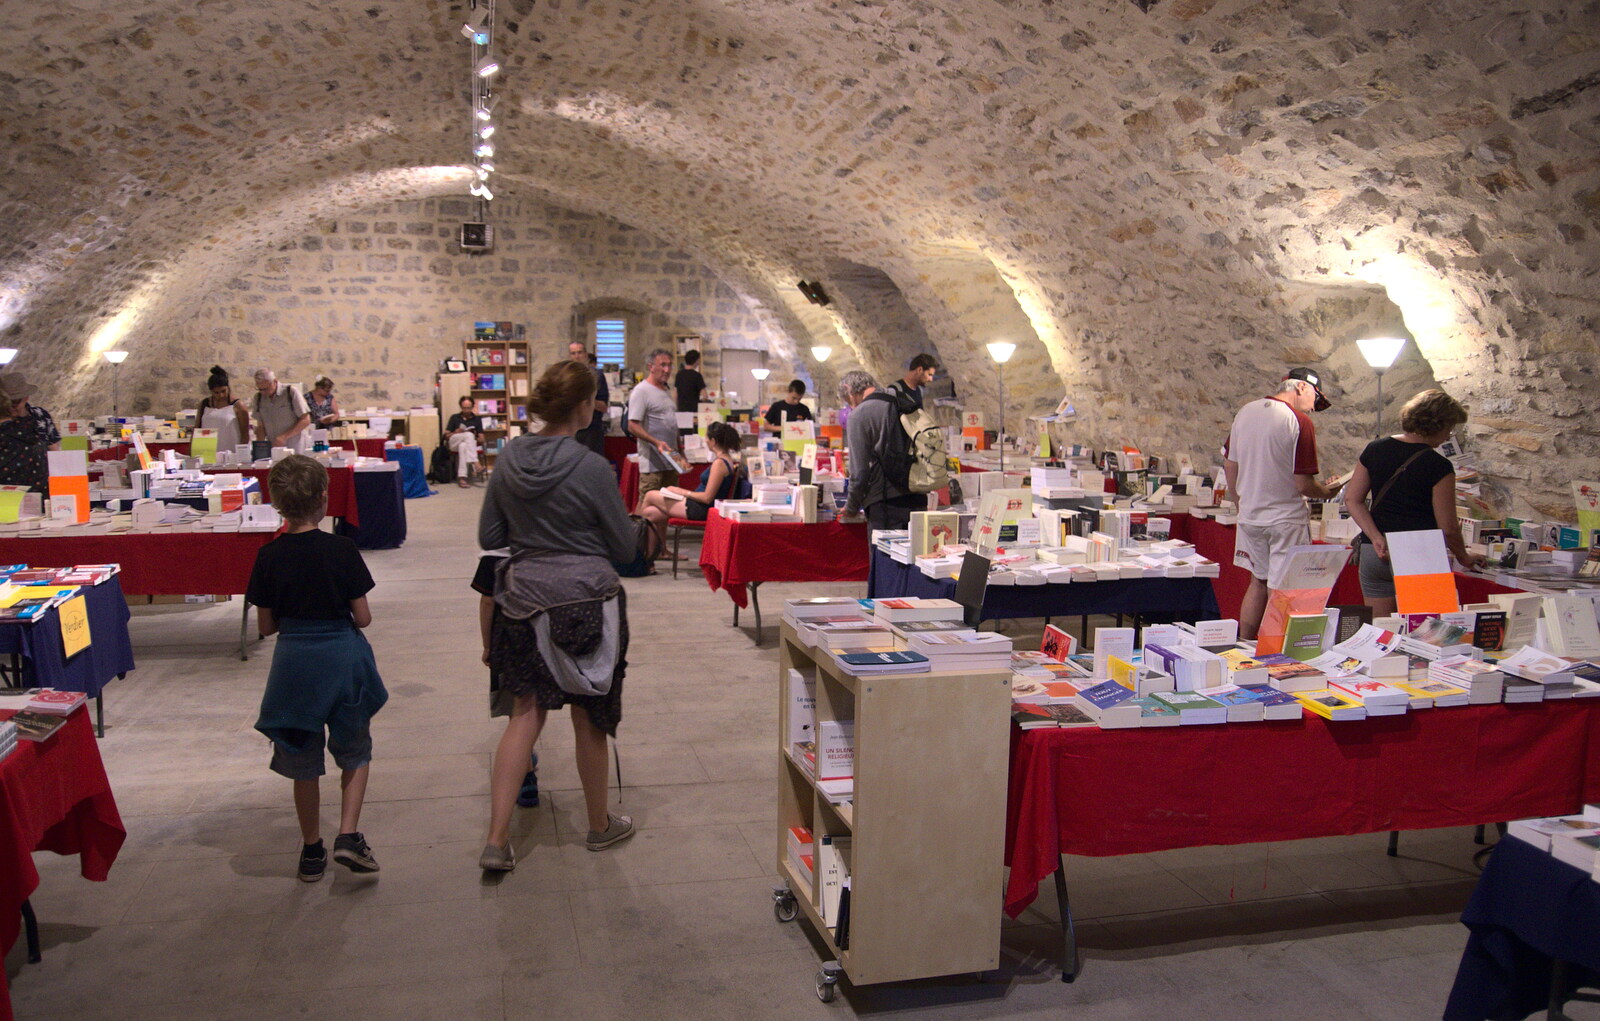 There's some sort of radical book sale going on from Abbaye Sainte-Marie de Lagrasse and The Lac de la Cavayère, Aude, France - 10th August